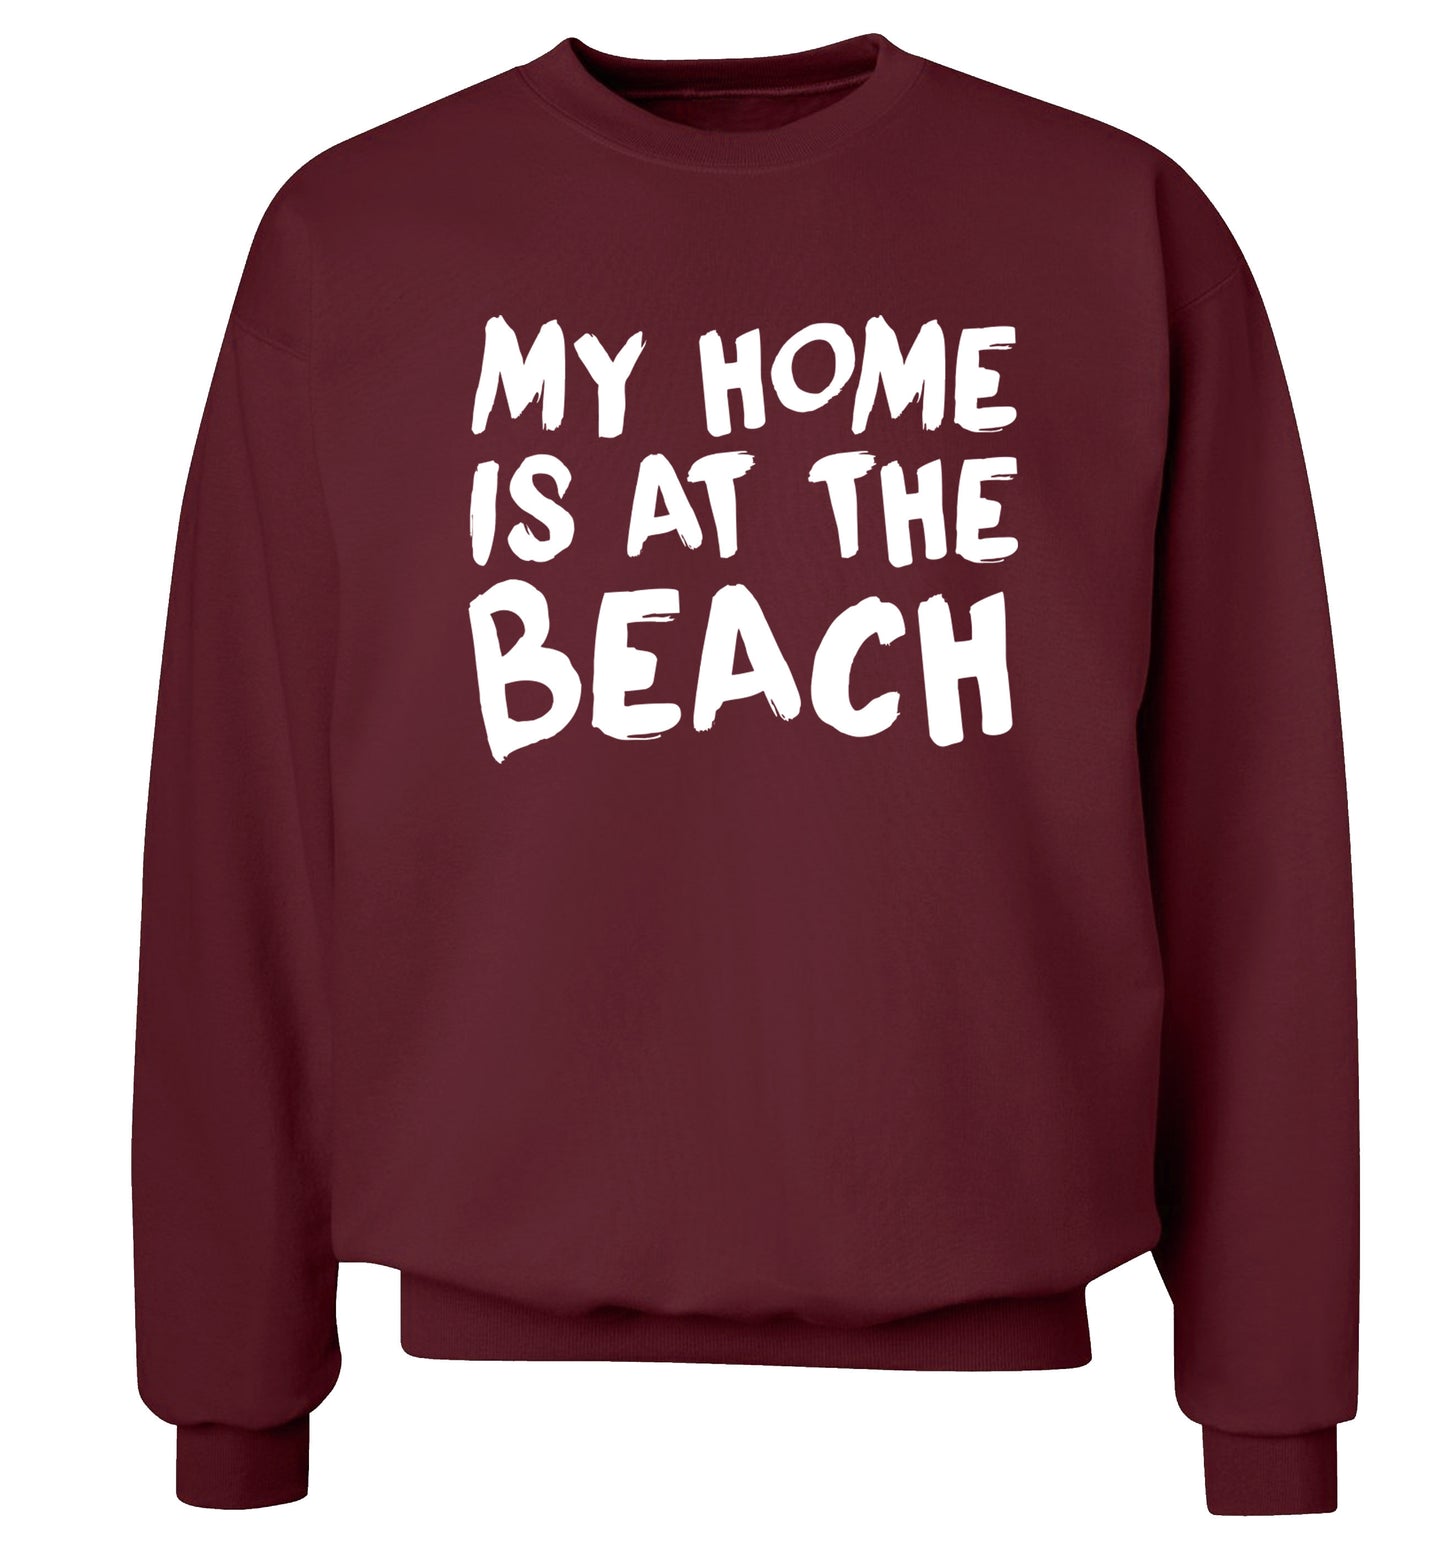 My home is at the beach Adult's unisex maroon Sweater 2XL